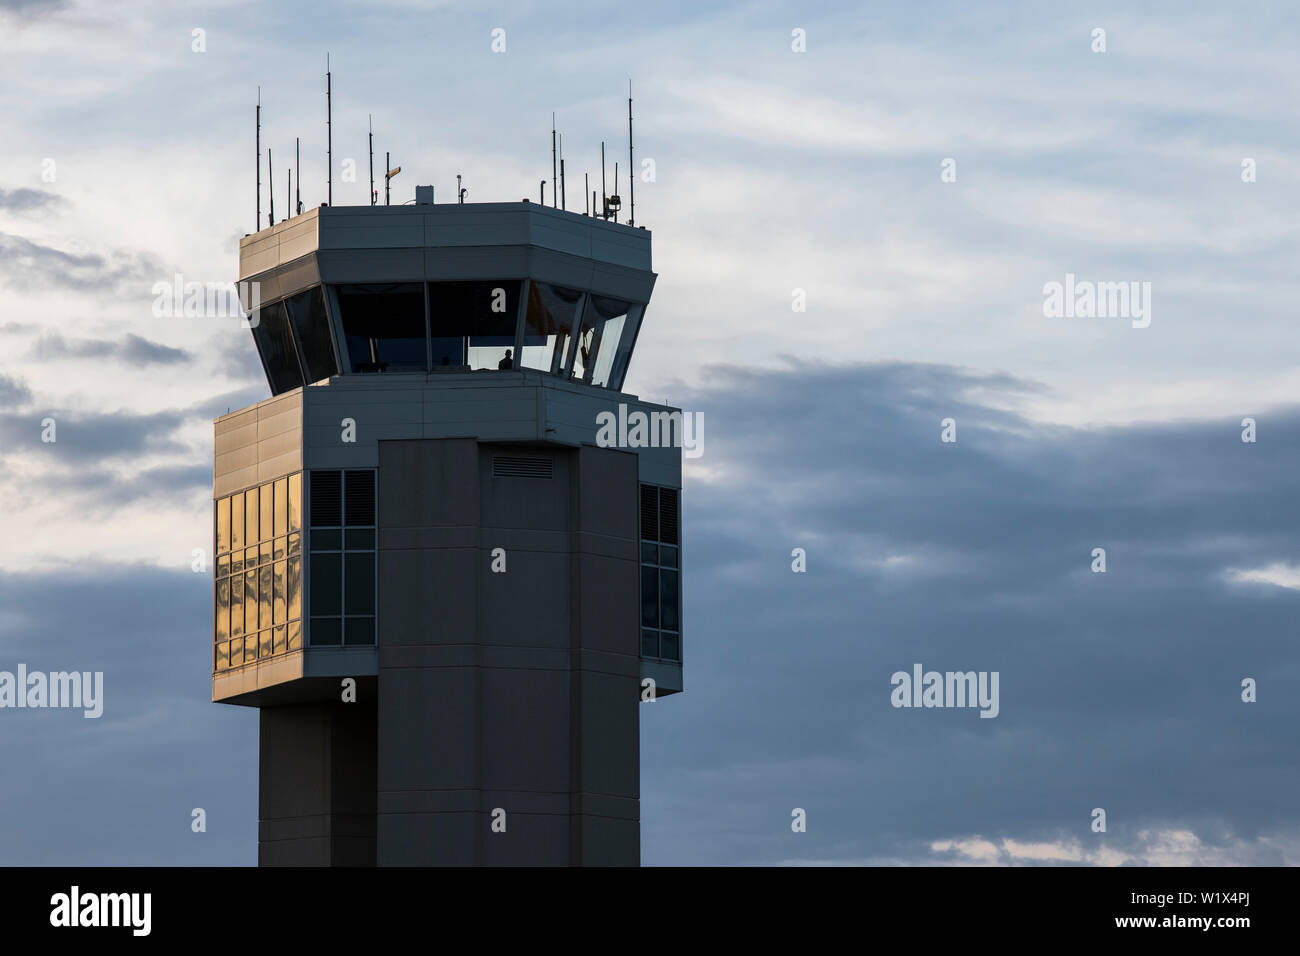 The sun slowly sets, its glow reflecting off the Dover Air Force Base air traffic control tower May 9, 2019, Del. Air traffic controllers are positioned in the tower to ensure every aircraft and vehicle on the airfield is taken care of, as well as every aircraft in flight within a radius of 10 to 15 miles. (U.S. Air Force photo by Senior Airman Christopher Quail) Stock Photo